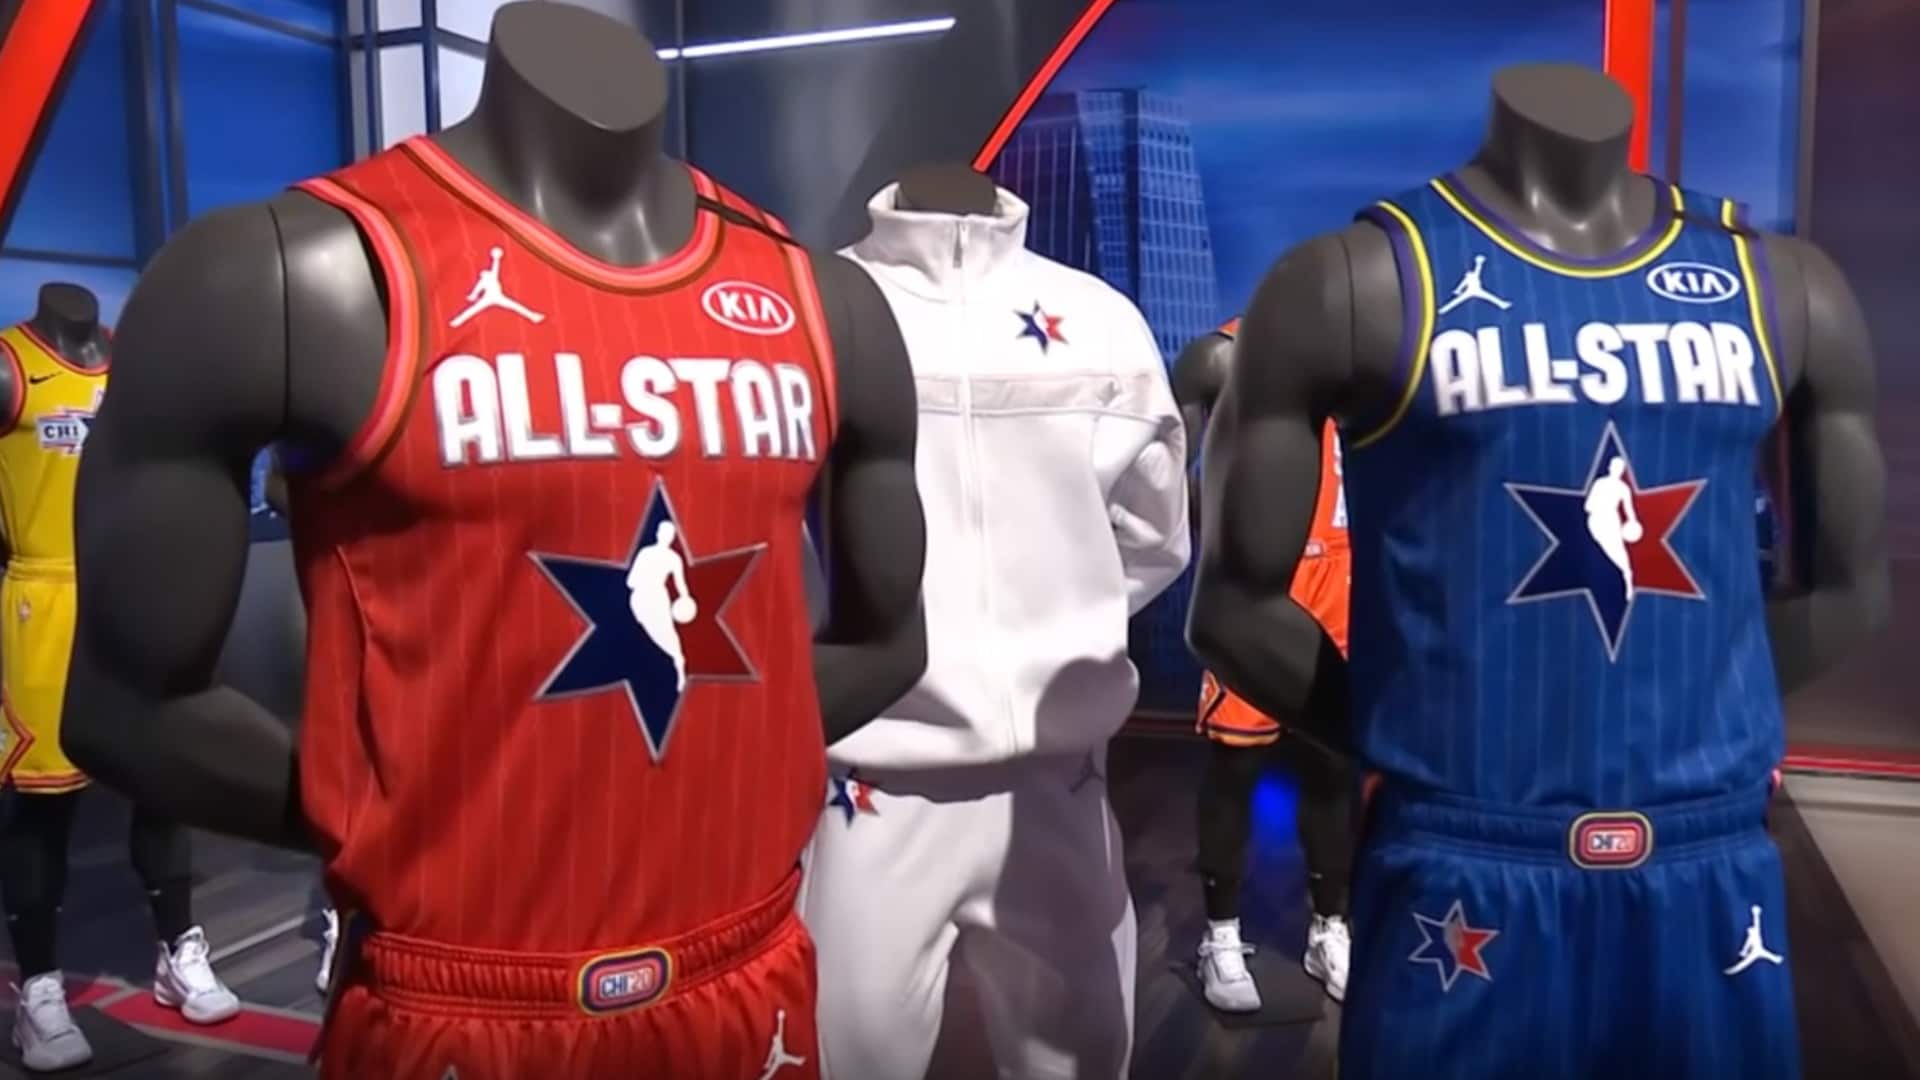 lebron 218 all star jersey